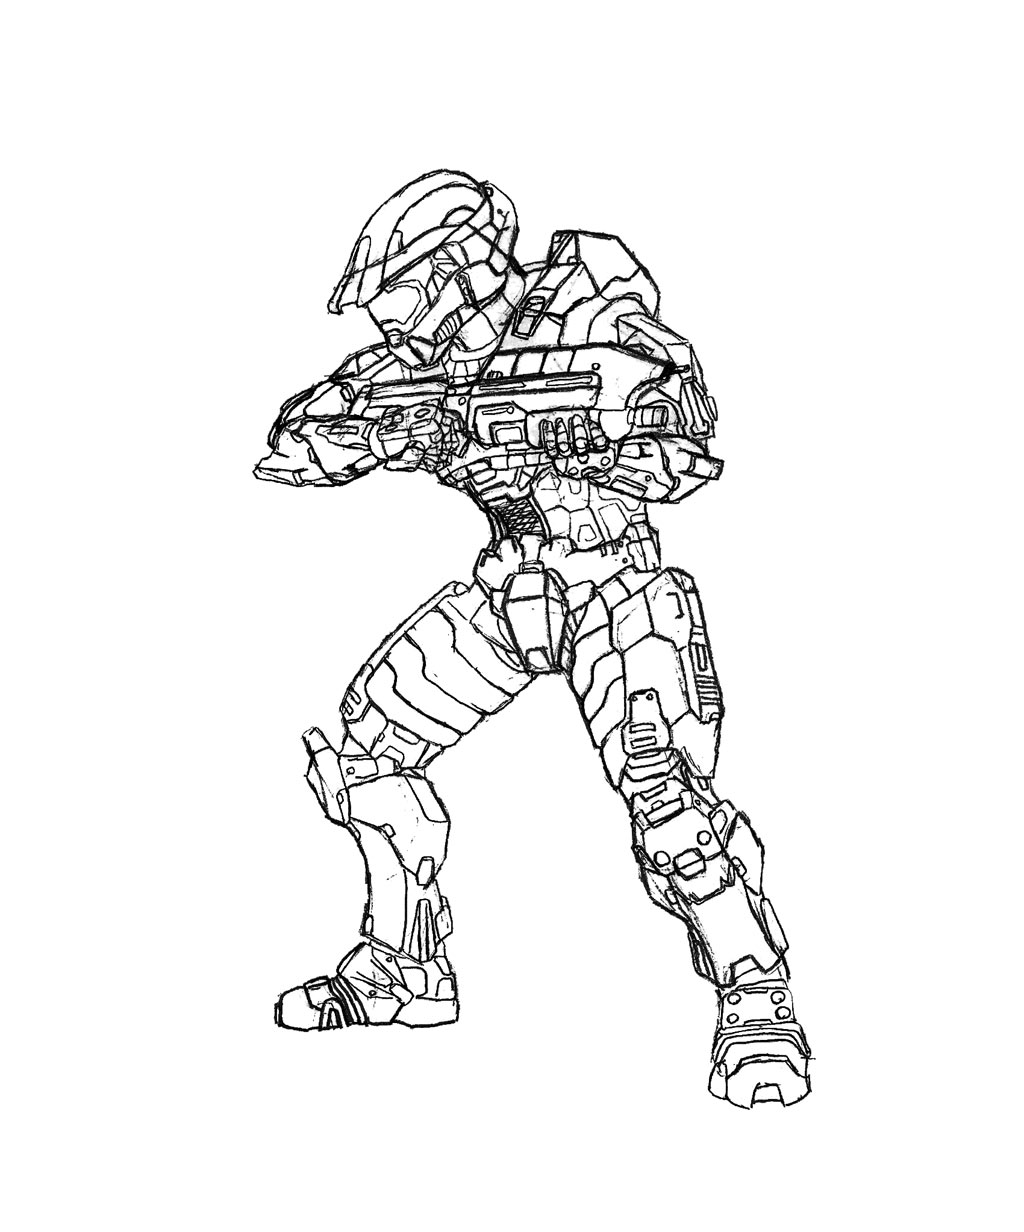 Halo Wars Vulcan - Free Coloring Pages